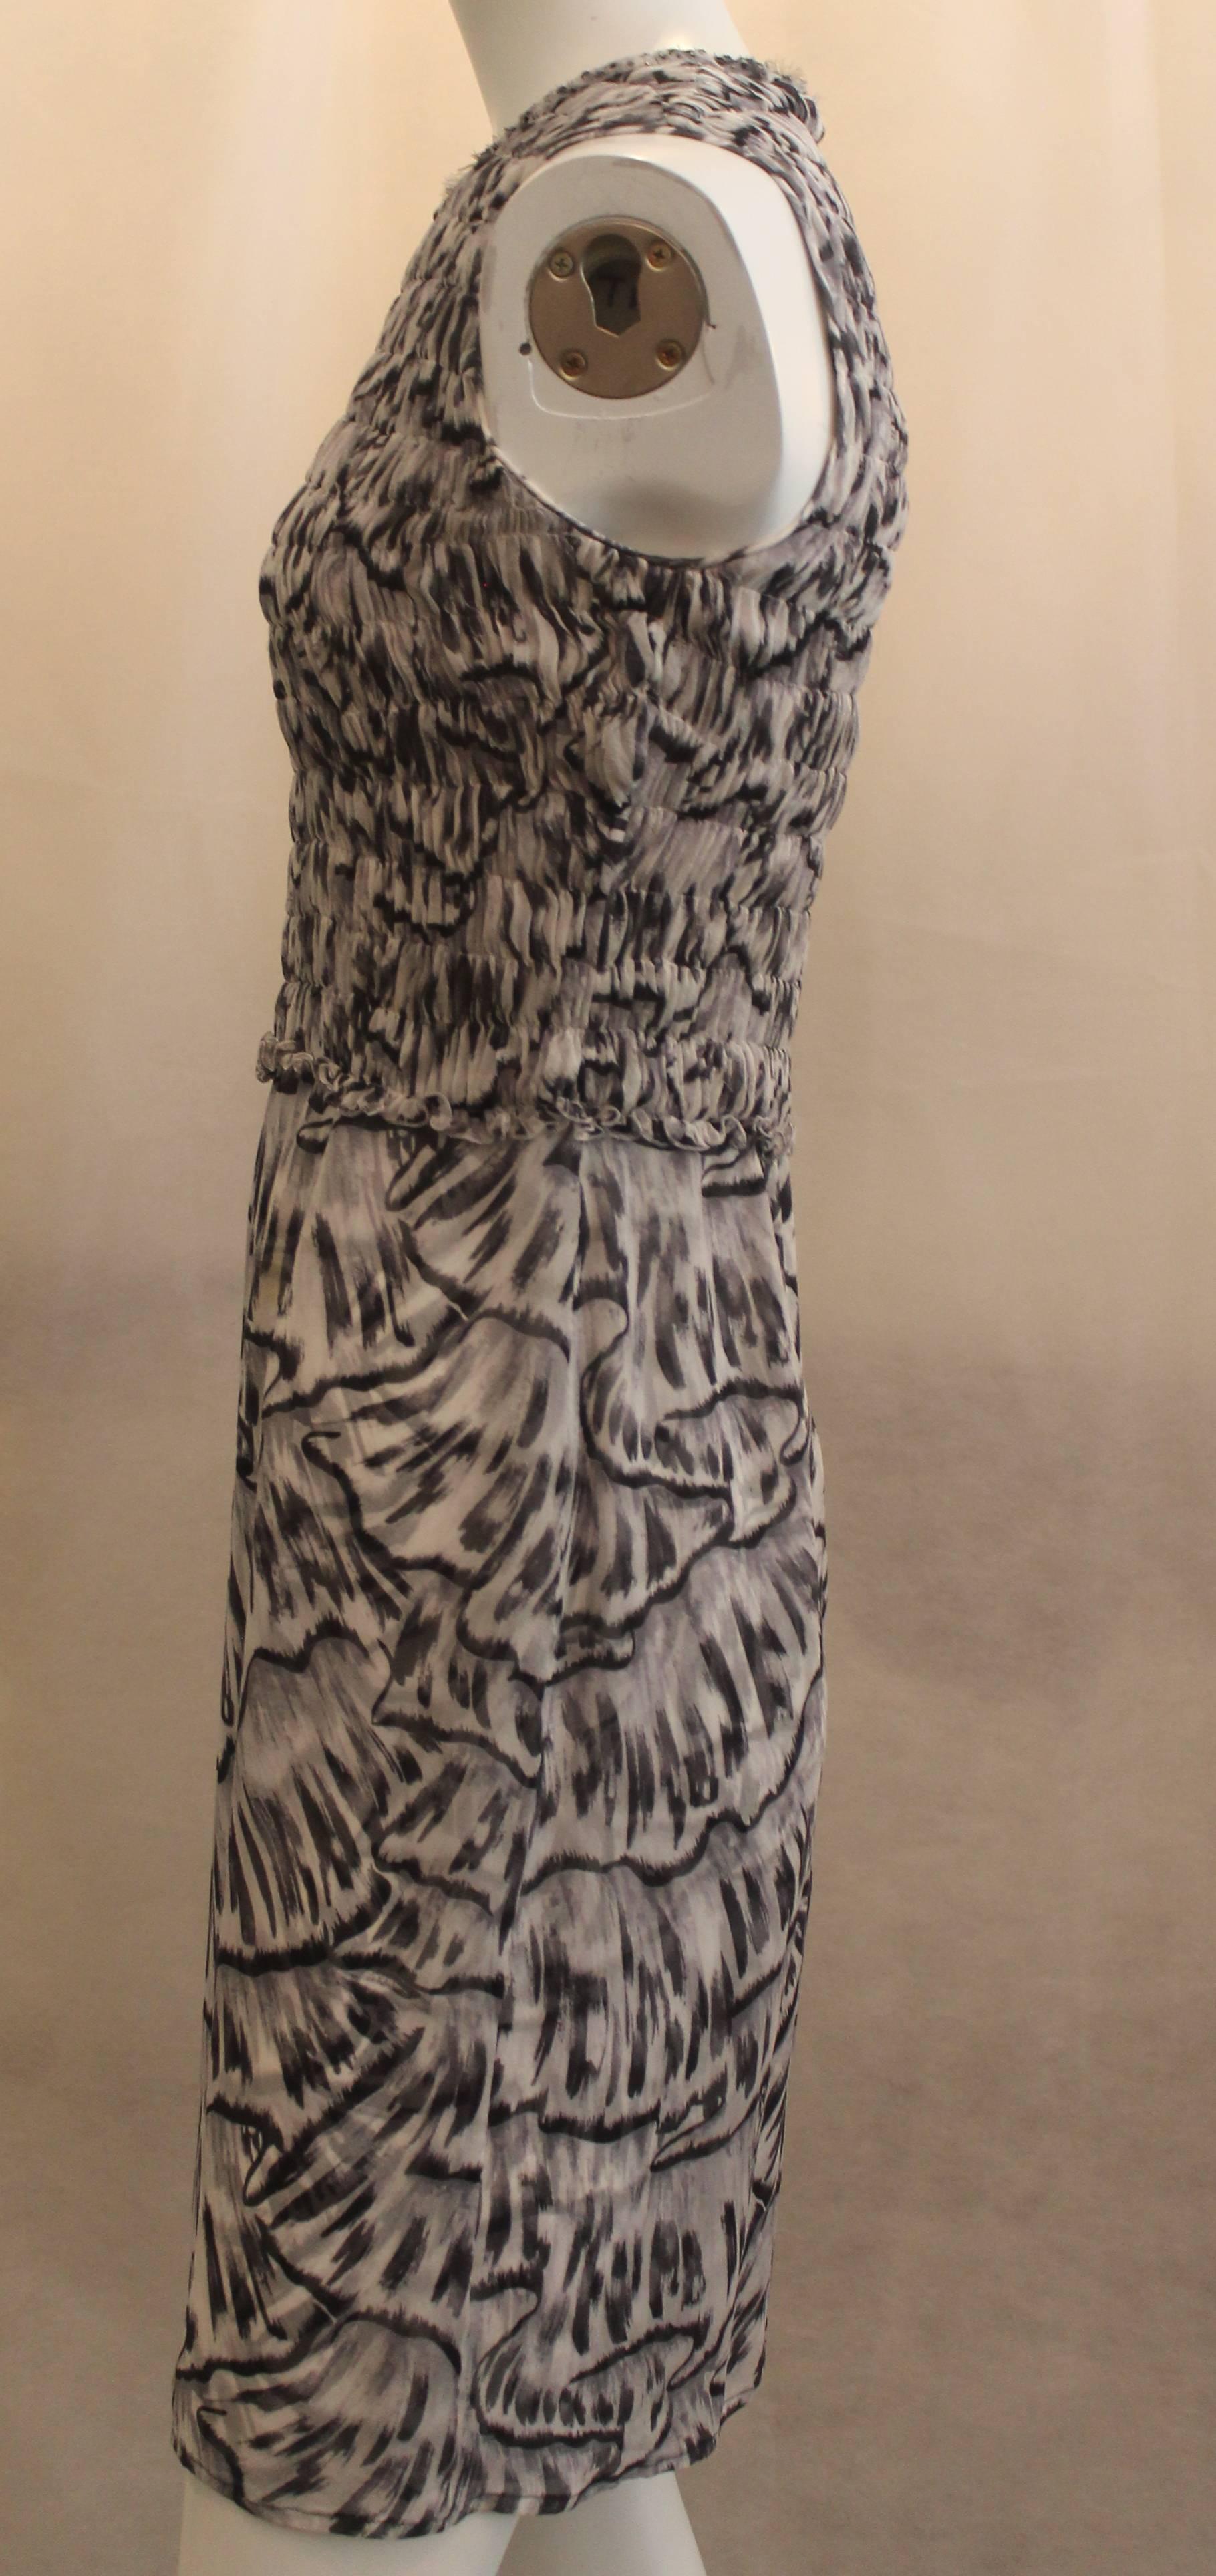 Bottega Veneta Silk Gray Animal Printed Sleeveless Ruched Dress - 40. This dress features black embezzlement on the neckline, a ruched bodice, and a sheer bottom. It has a black and dark gray animal print. It is is good condition. There is one